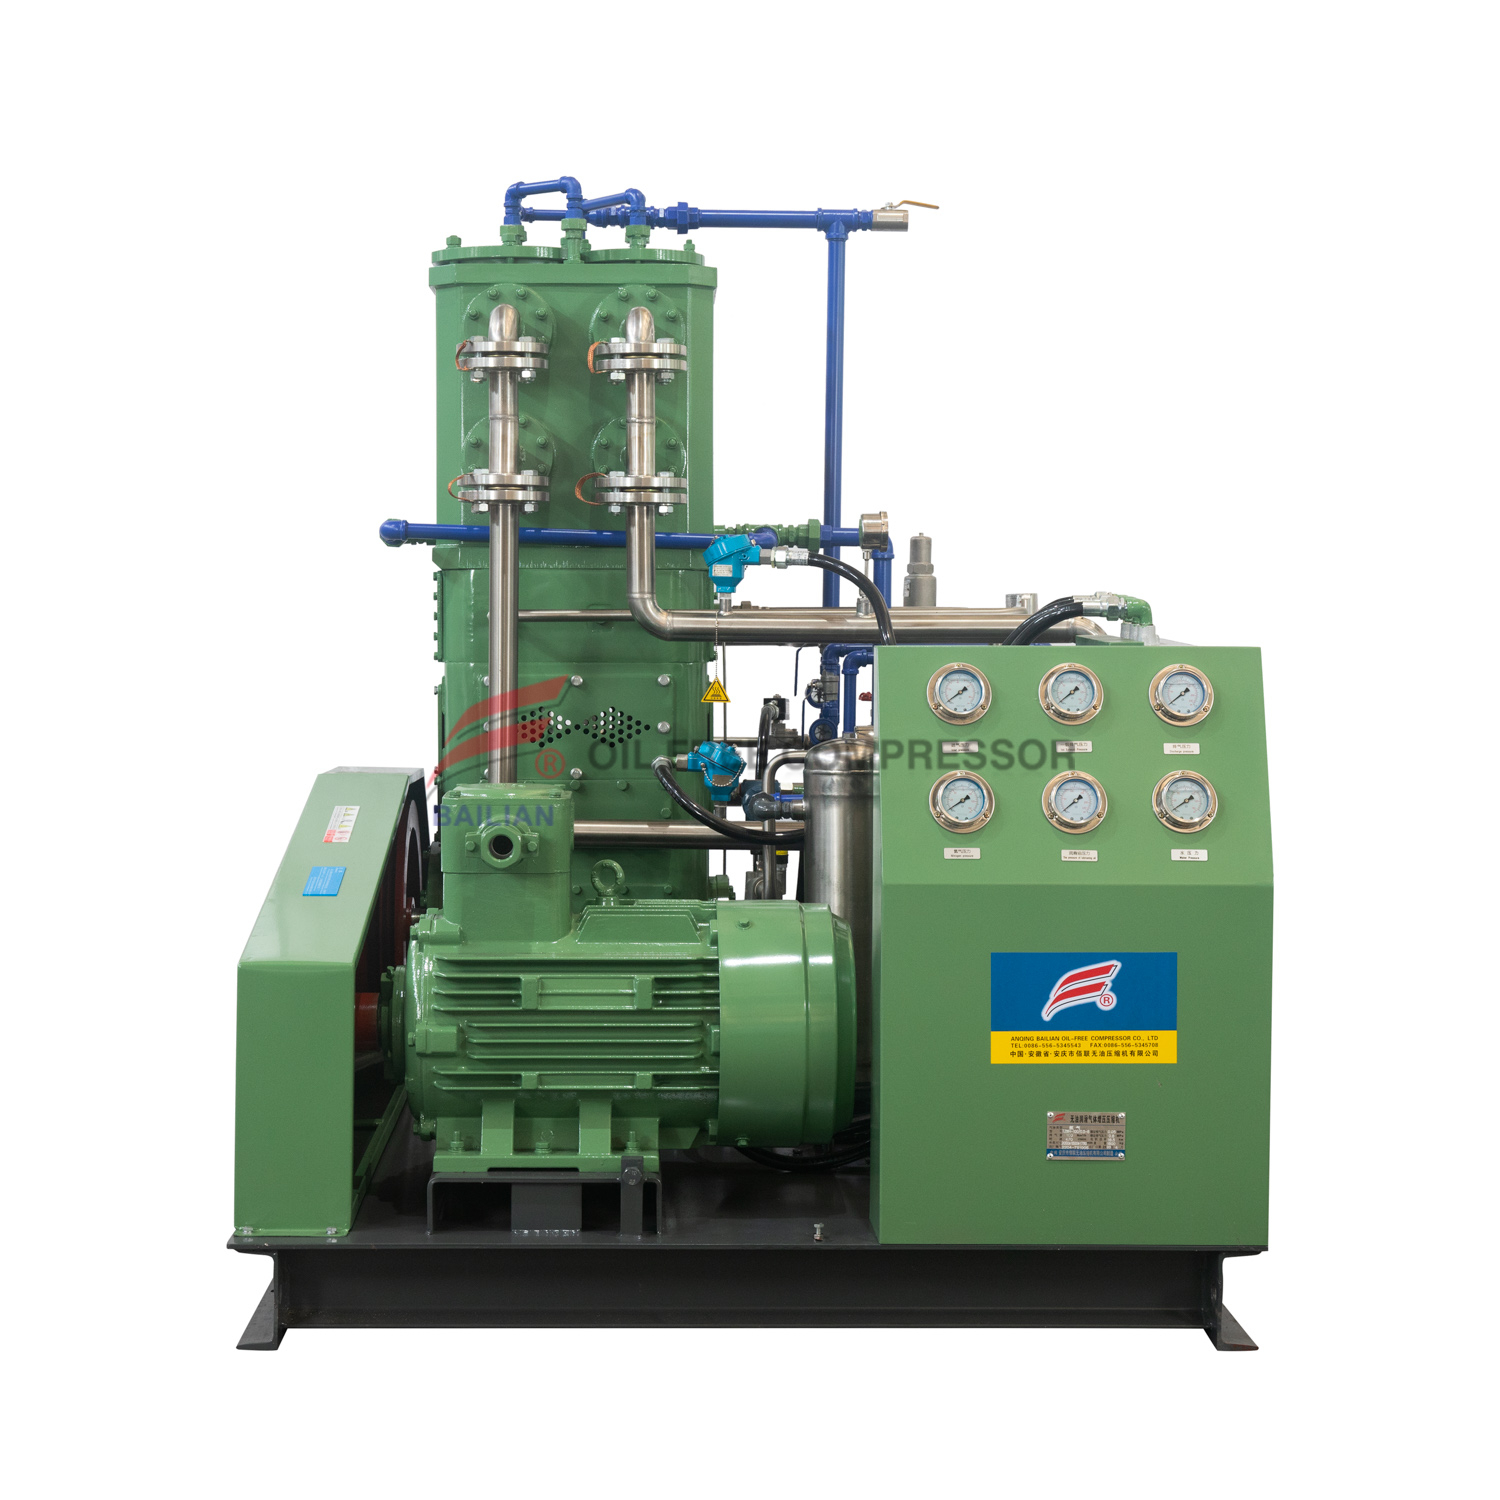 TZWH-240/10-23 Vertical oil-free pry mounted type H2 Compressor